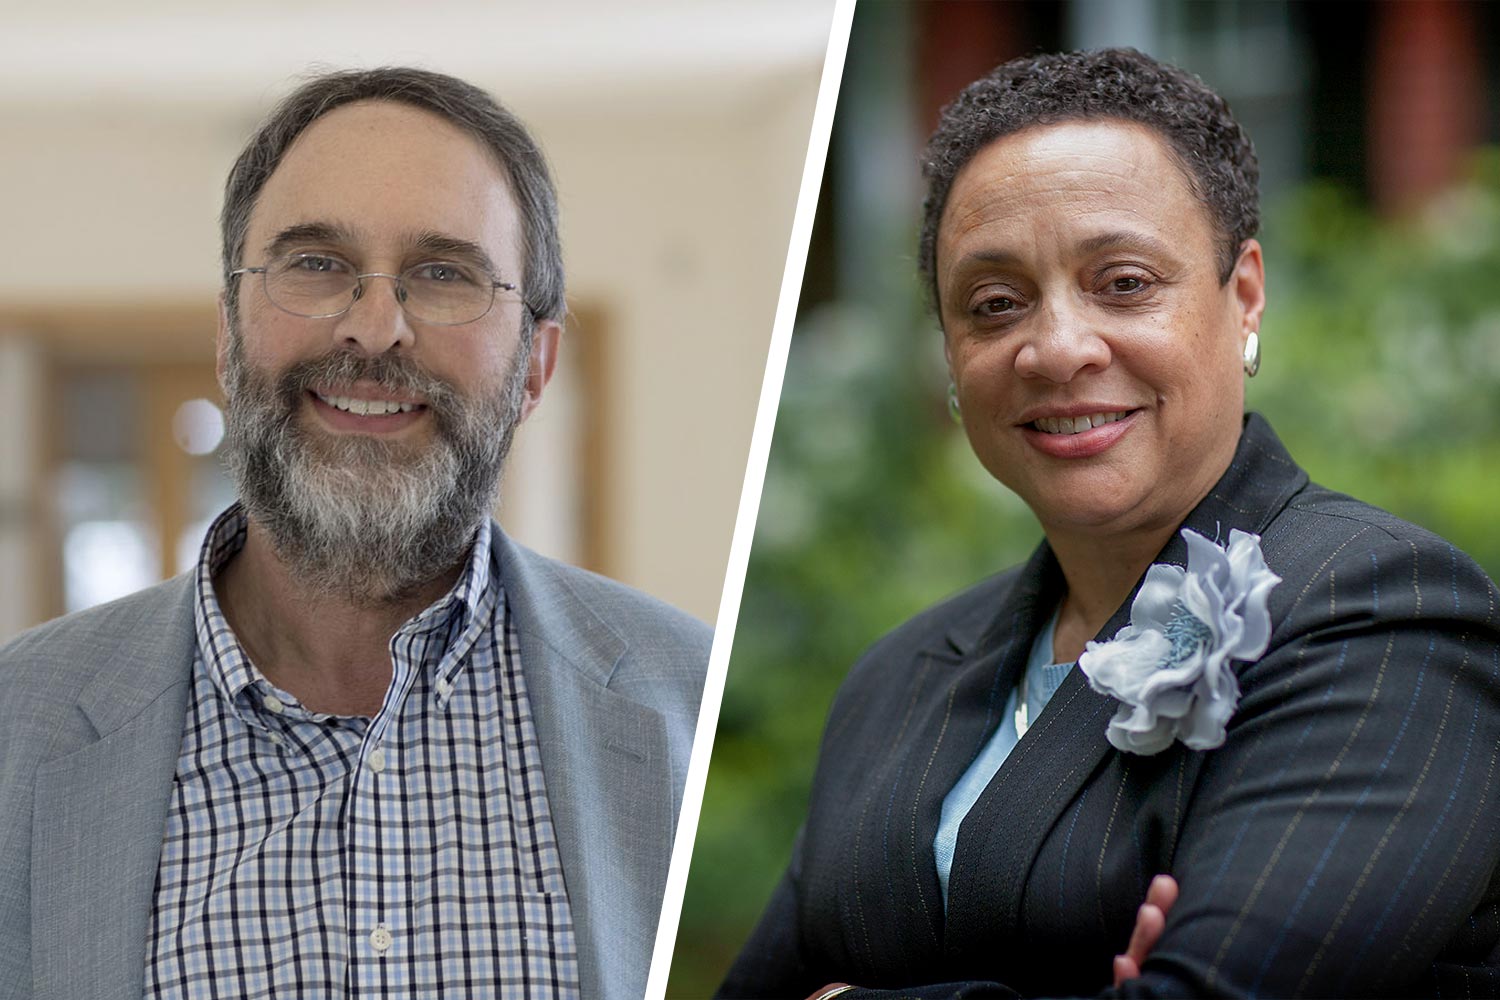 Victor Luftig has directed UVA’s Center for the Liberal Arts since 2000. Patrice Grimes of the Curry School of Education attended the program as a teacher of social studies teachers.